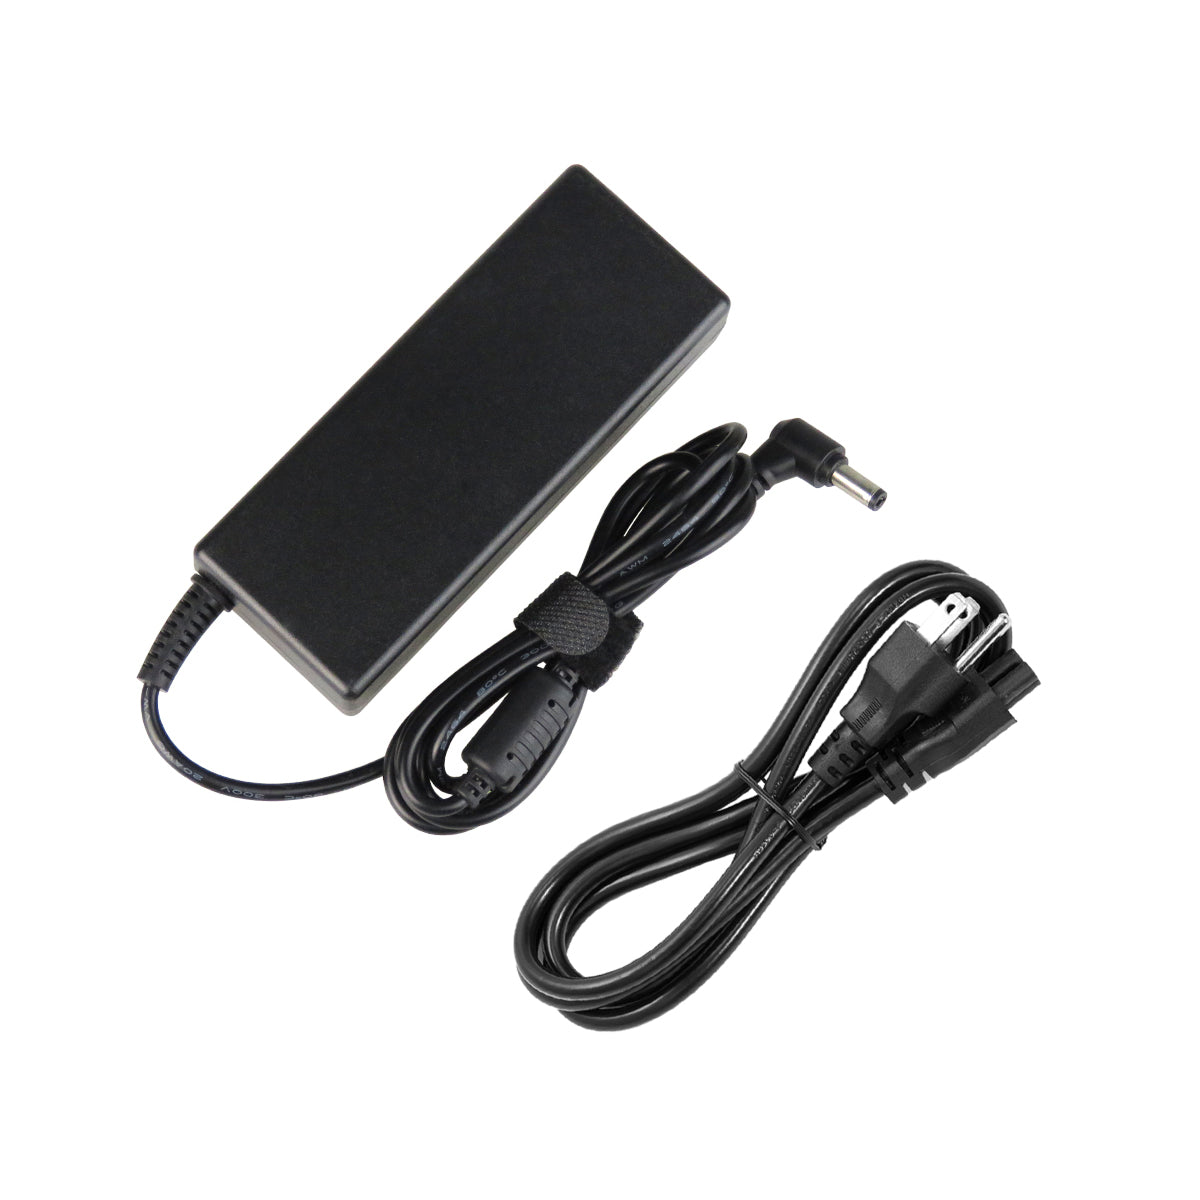 AC Adapter Charger for ASUS A8Fm Notebook.